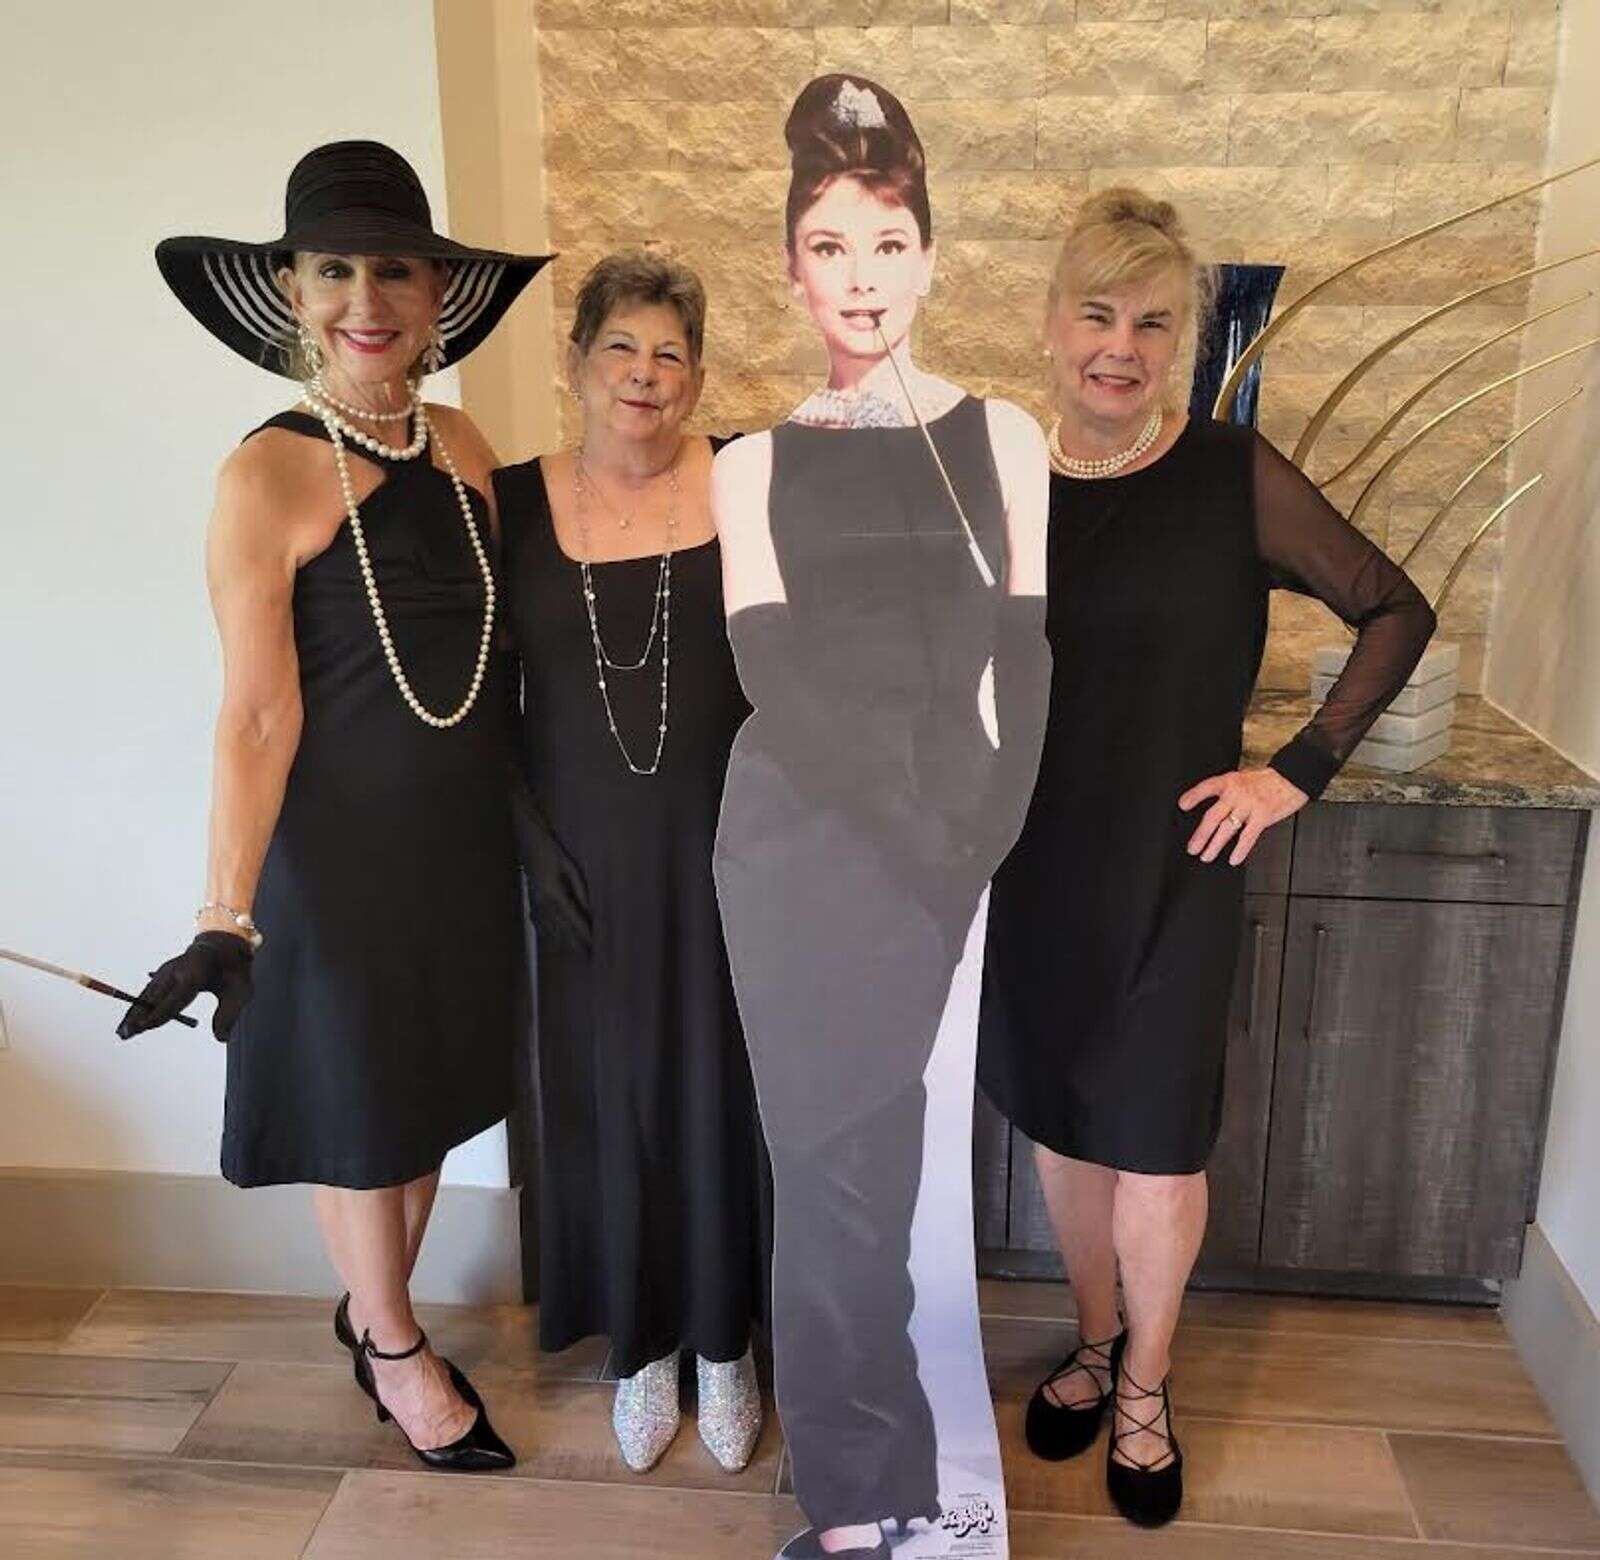 Friends, fun and lots of little black dresses – The Durango Herald